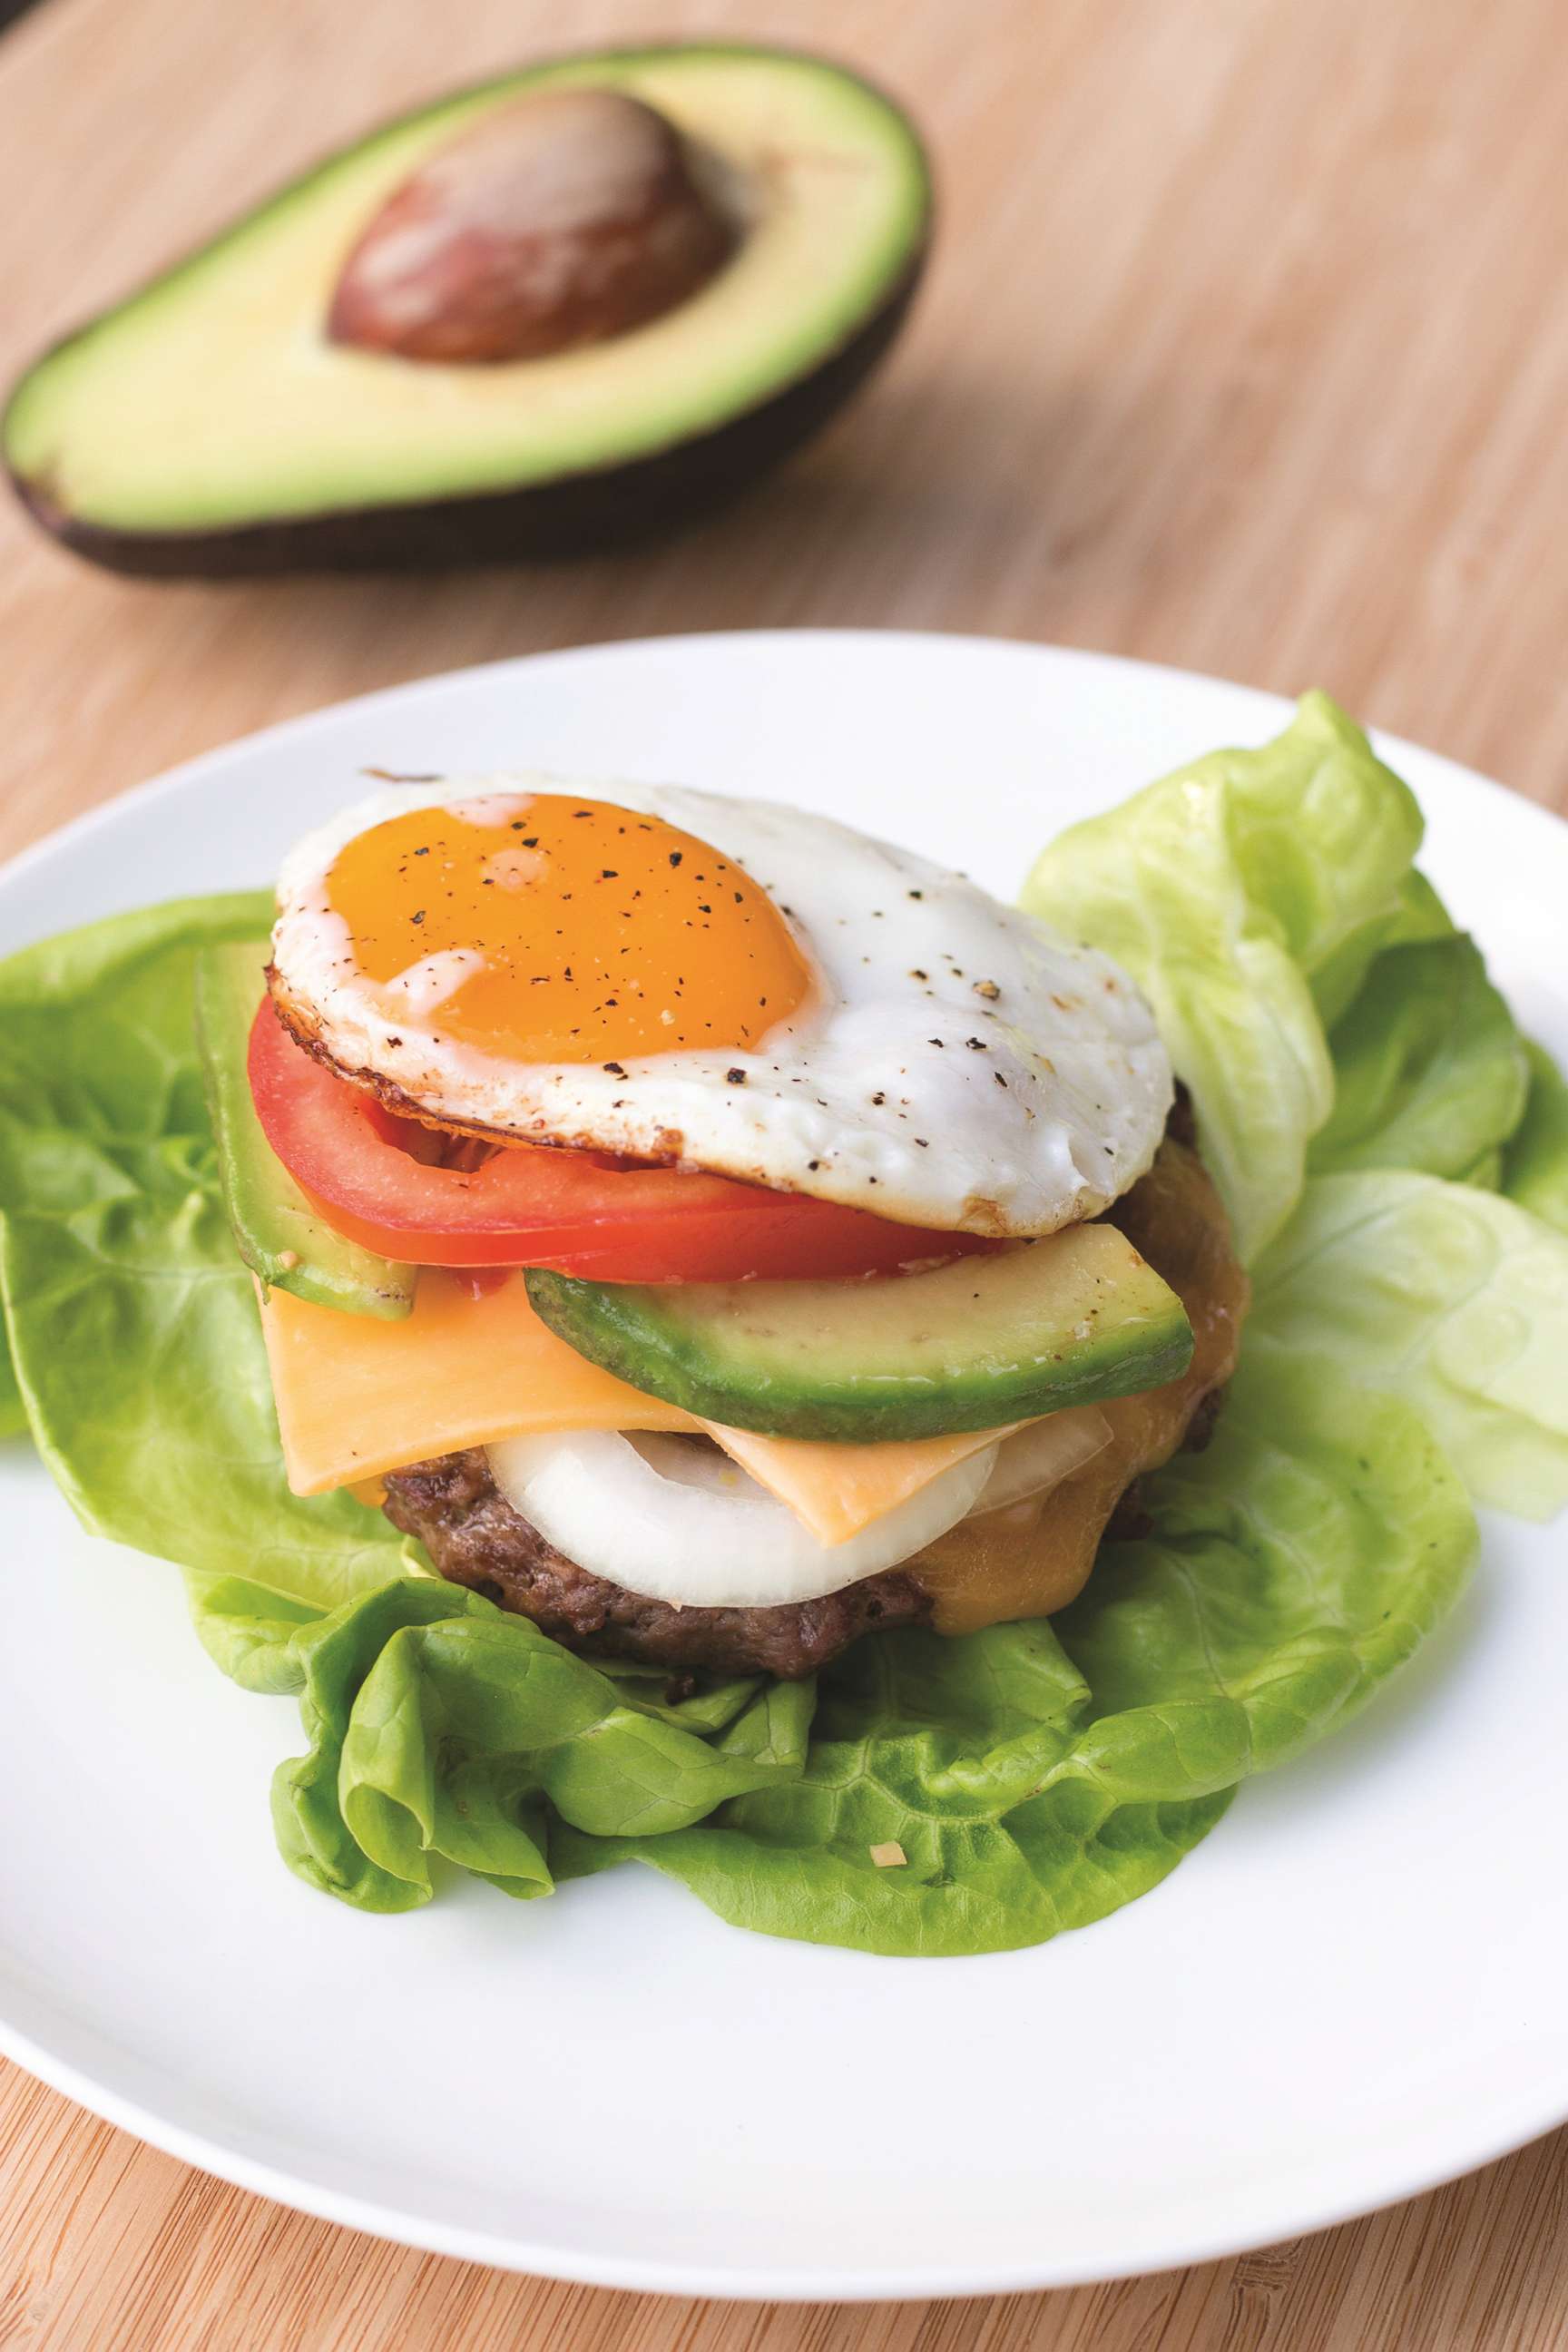 PHOTO: "Simply Keto" author Suzanne Ryan's recipe for sunny side-up burgers.